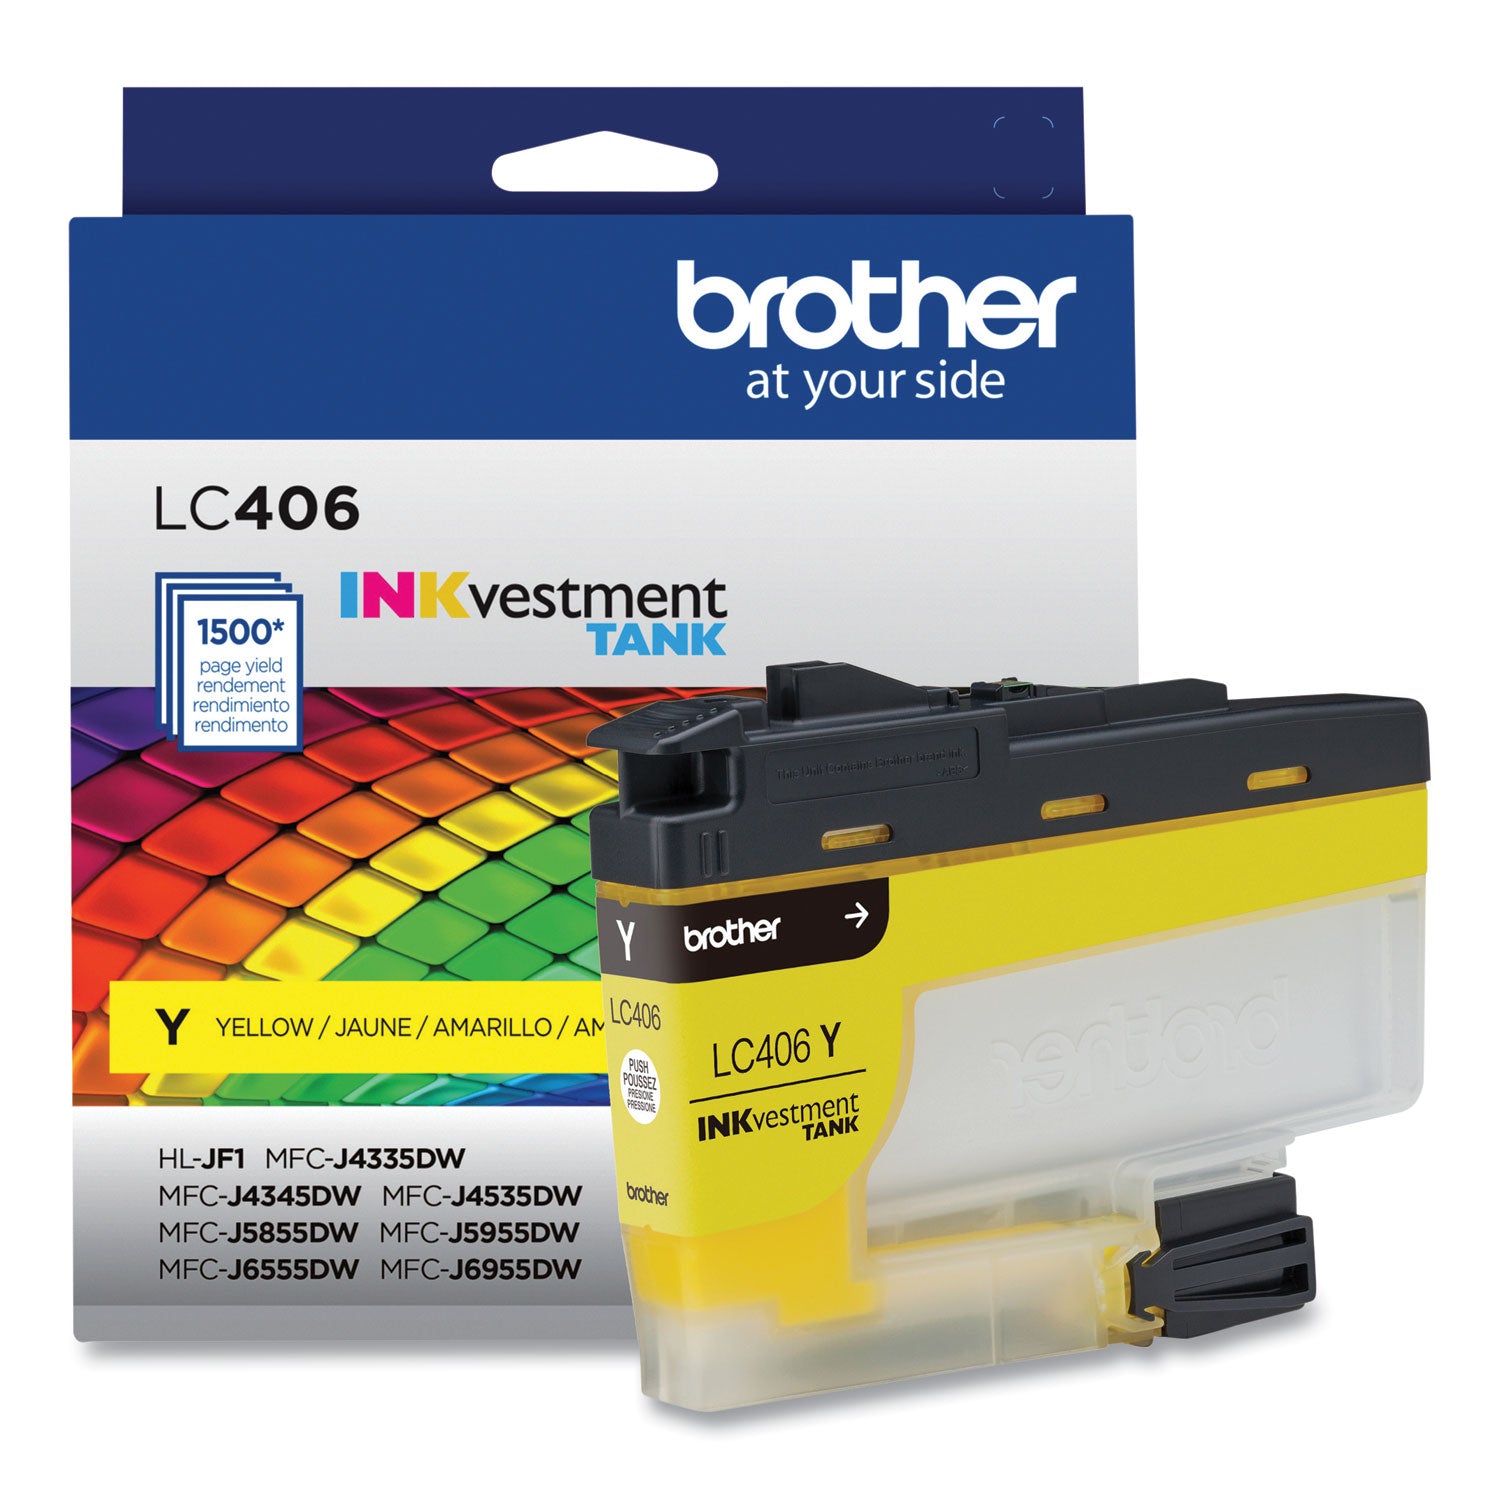 lc406ys-inkvestment-ink-1500-page-yield-yellow_brtlc406ys - 4